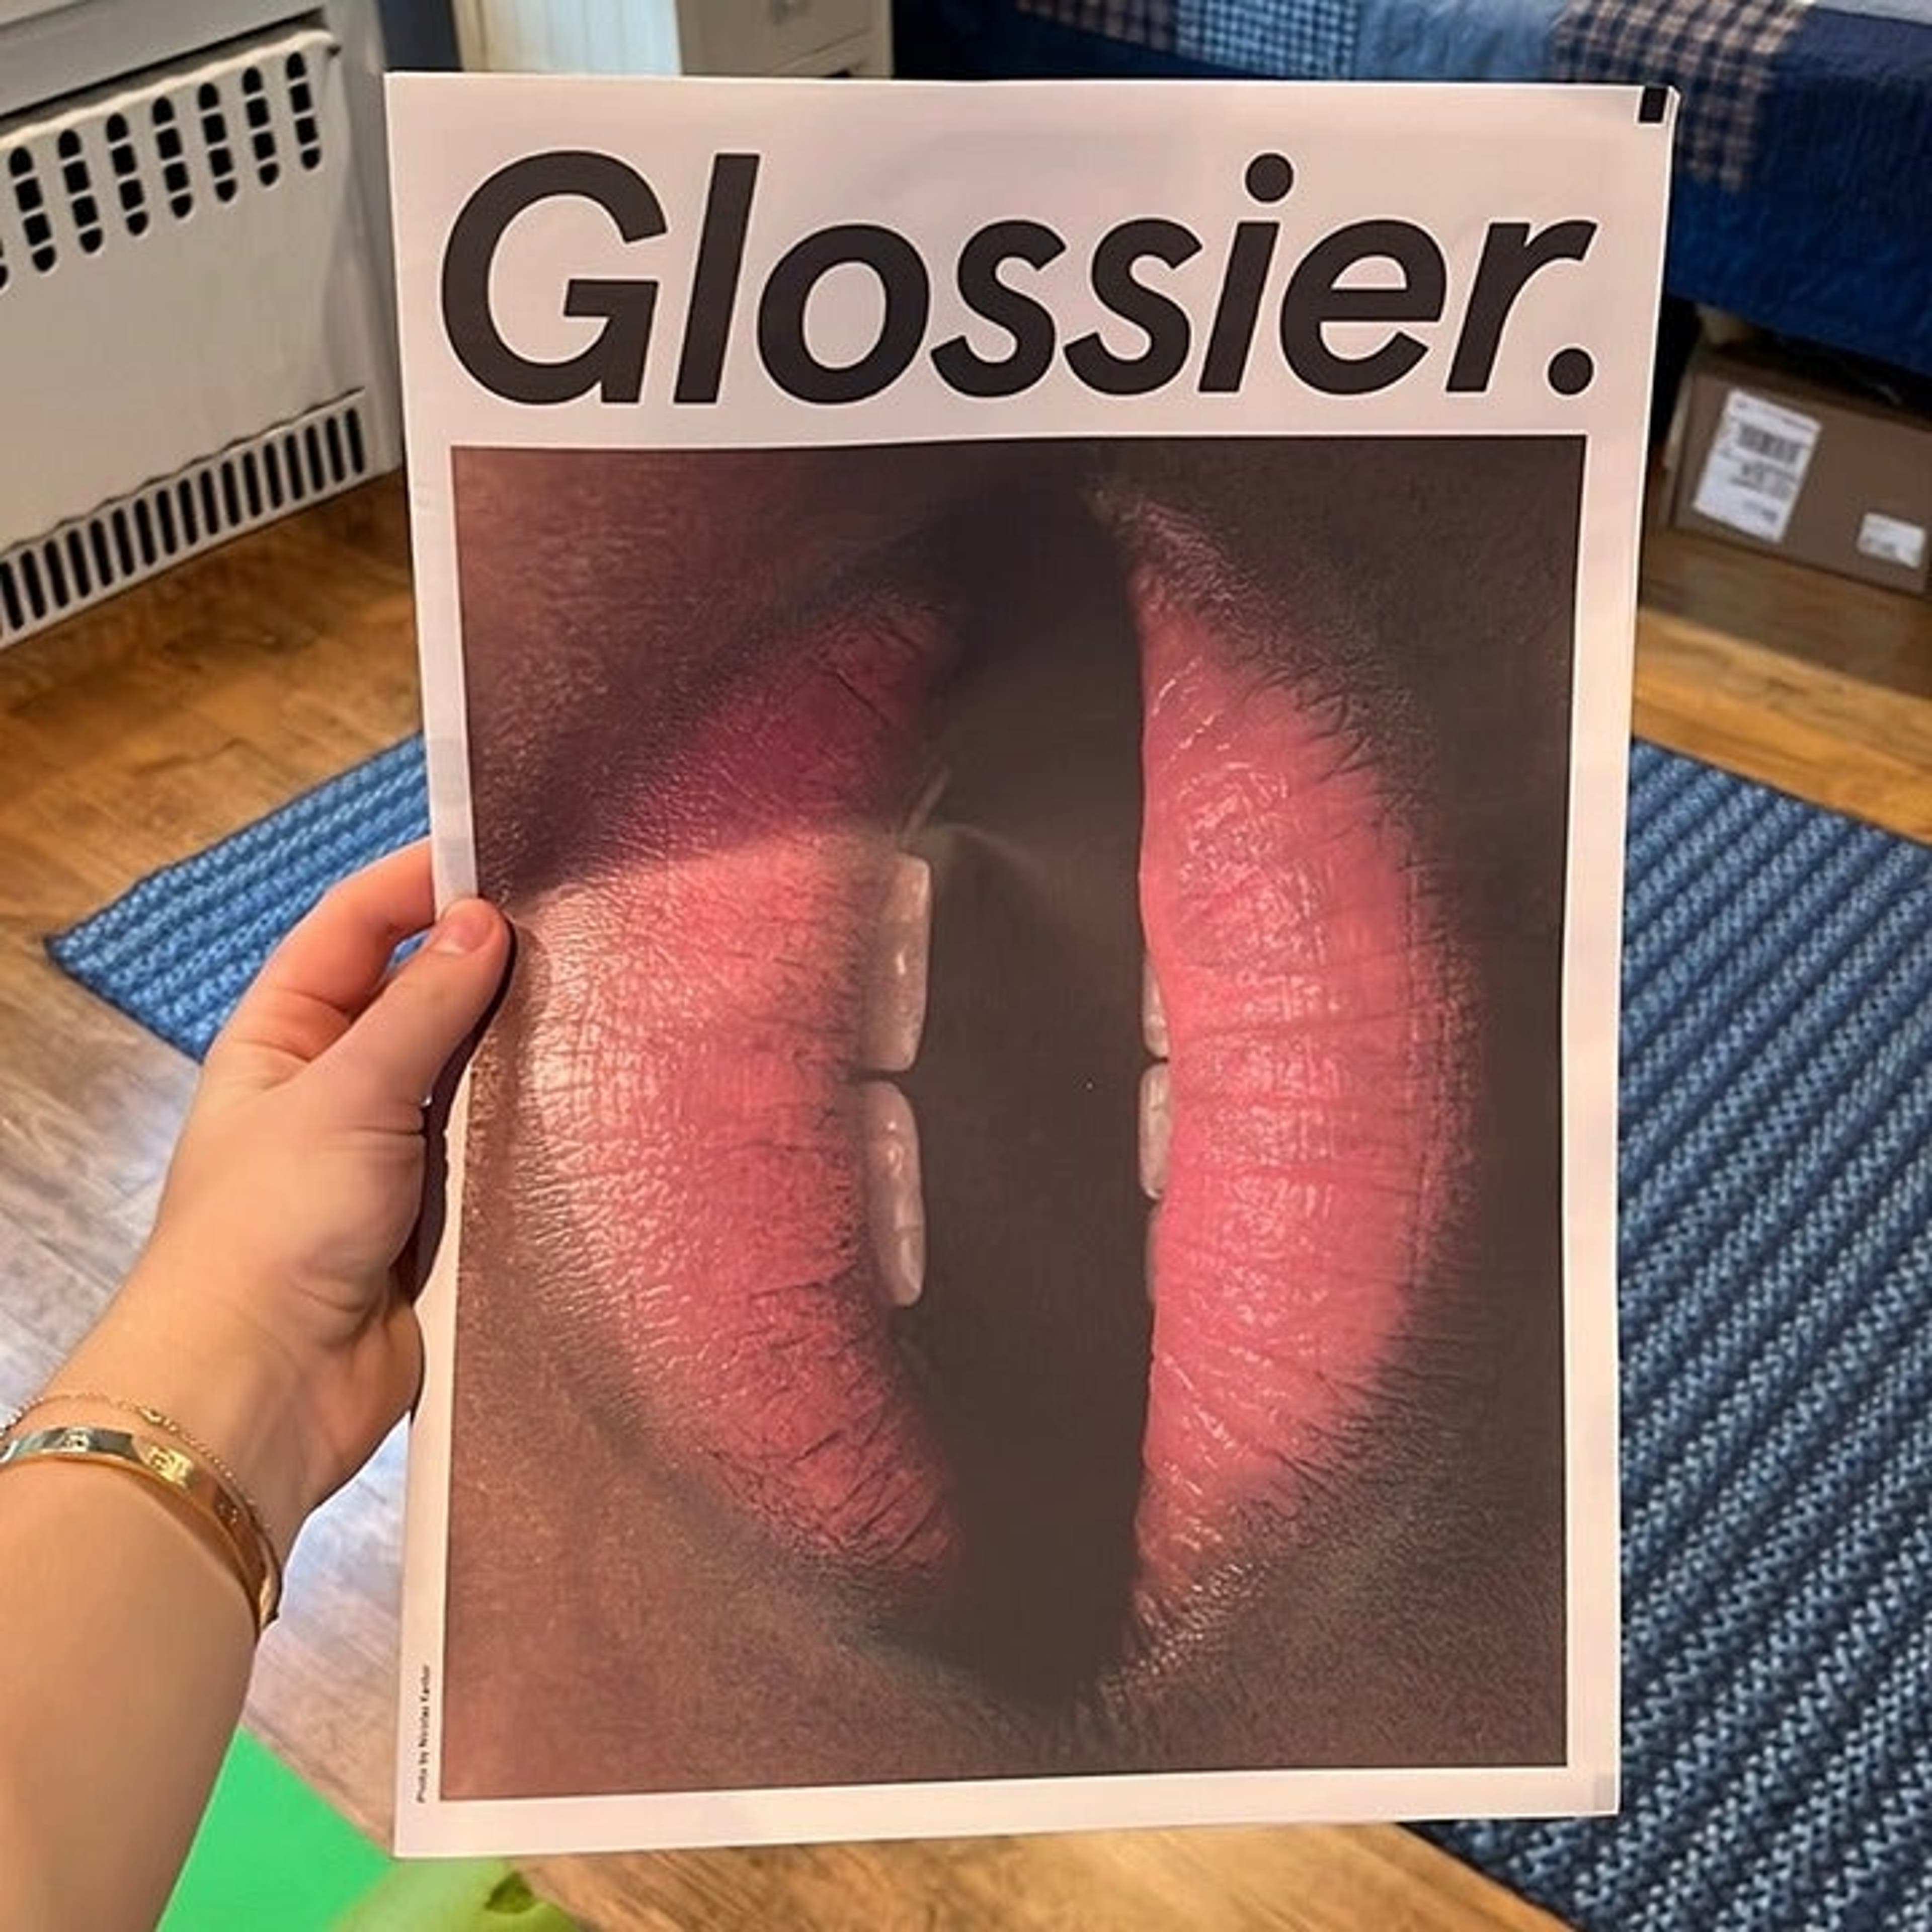 Glossier Other Items in Beauty